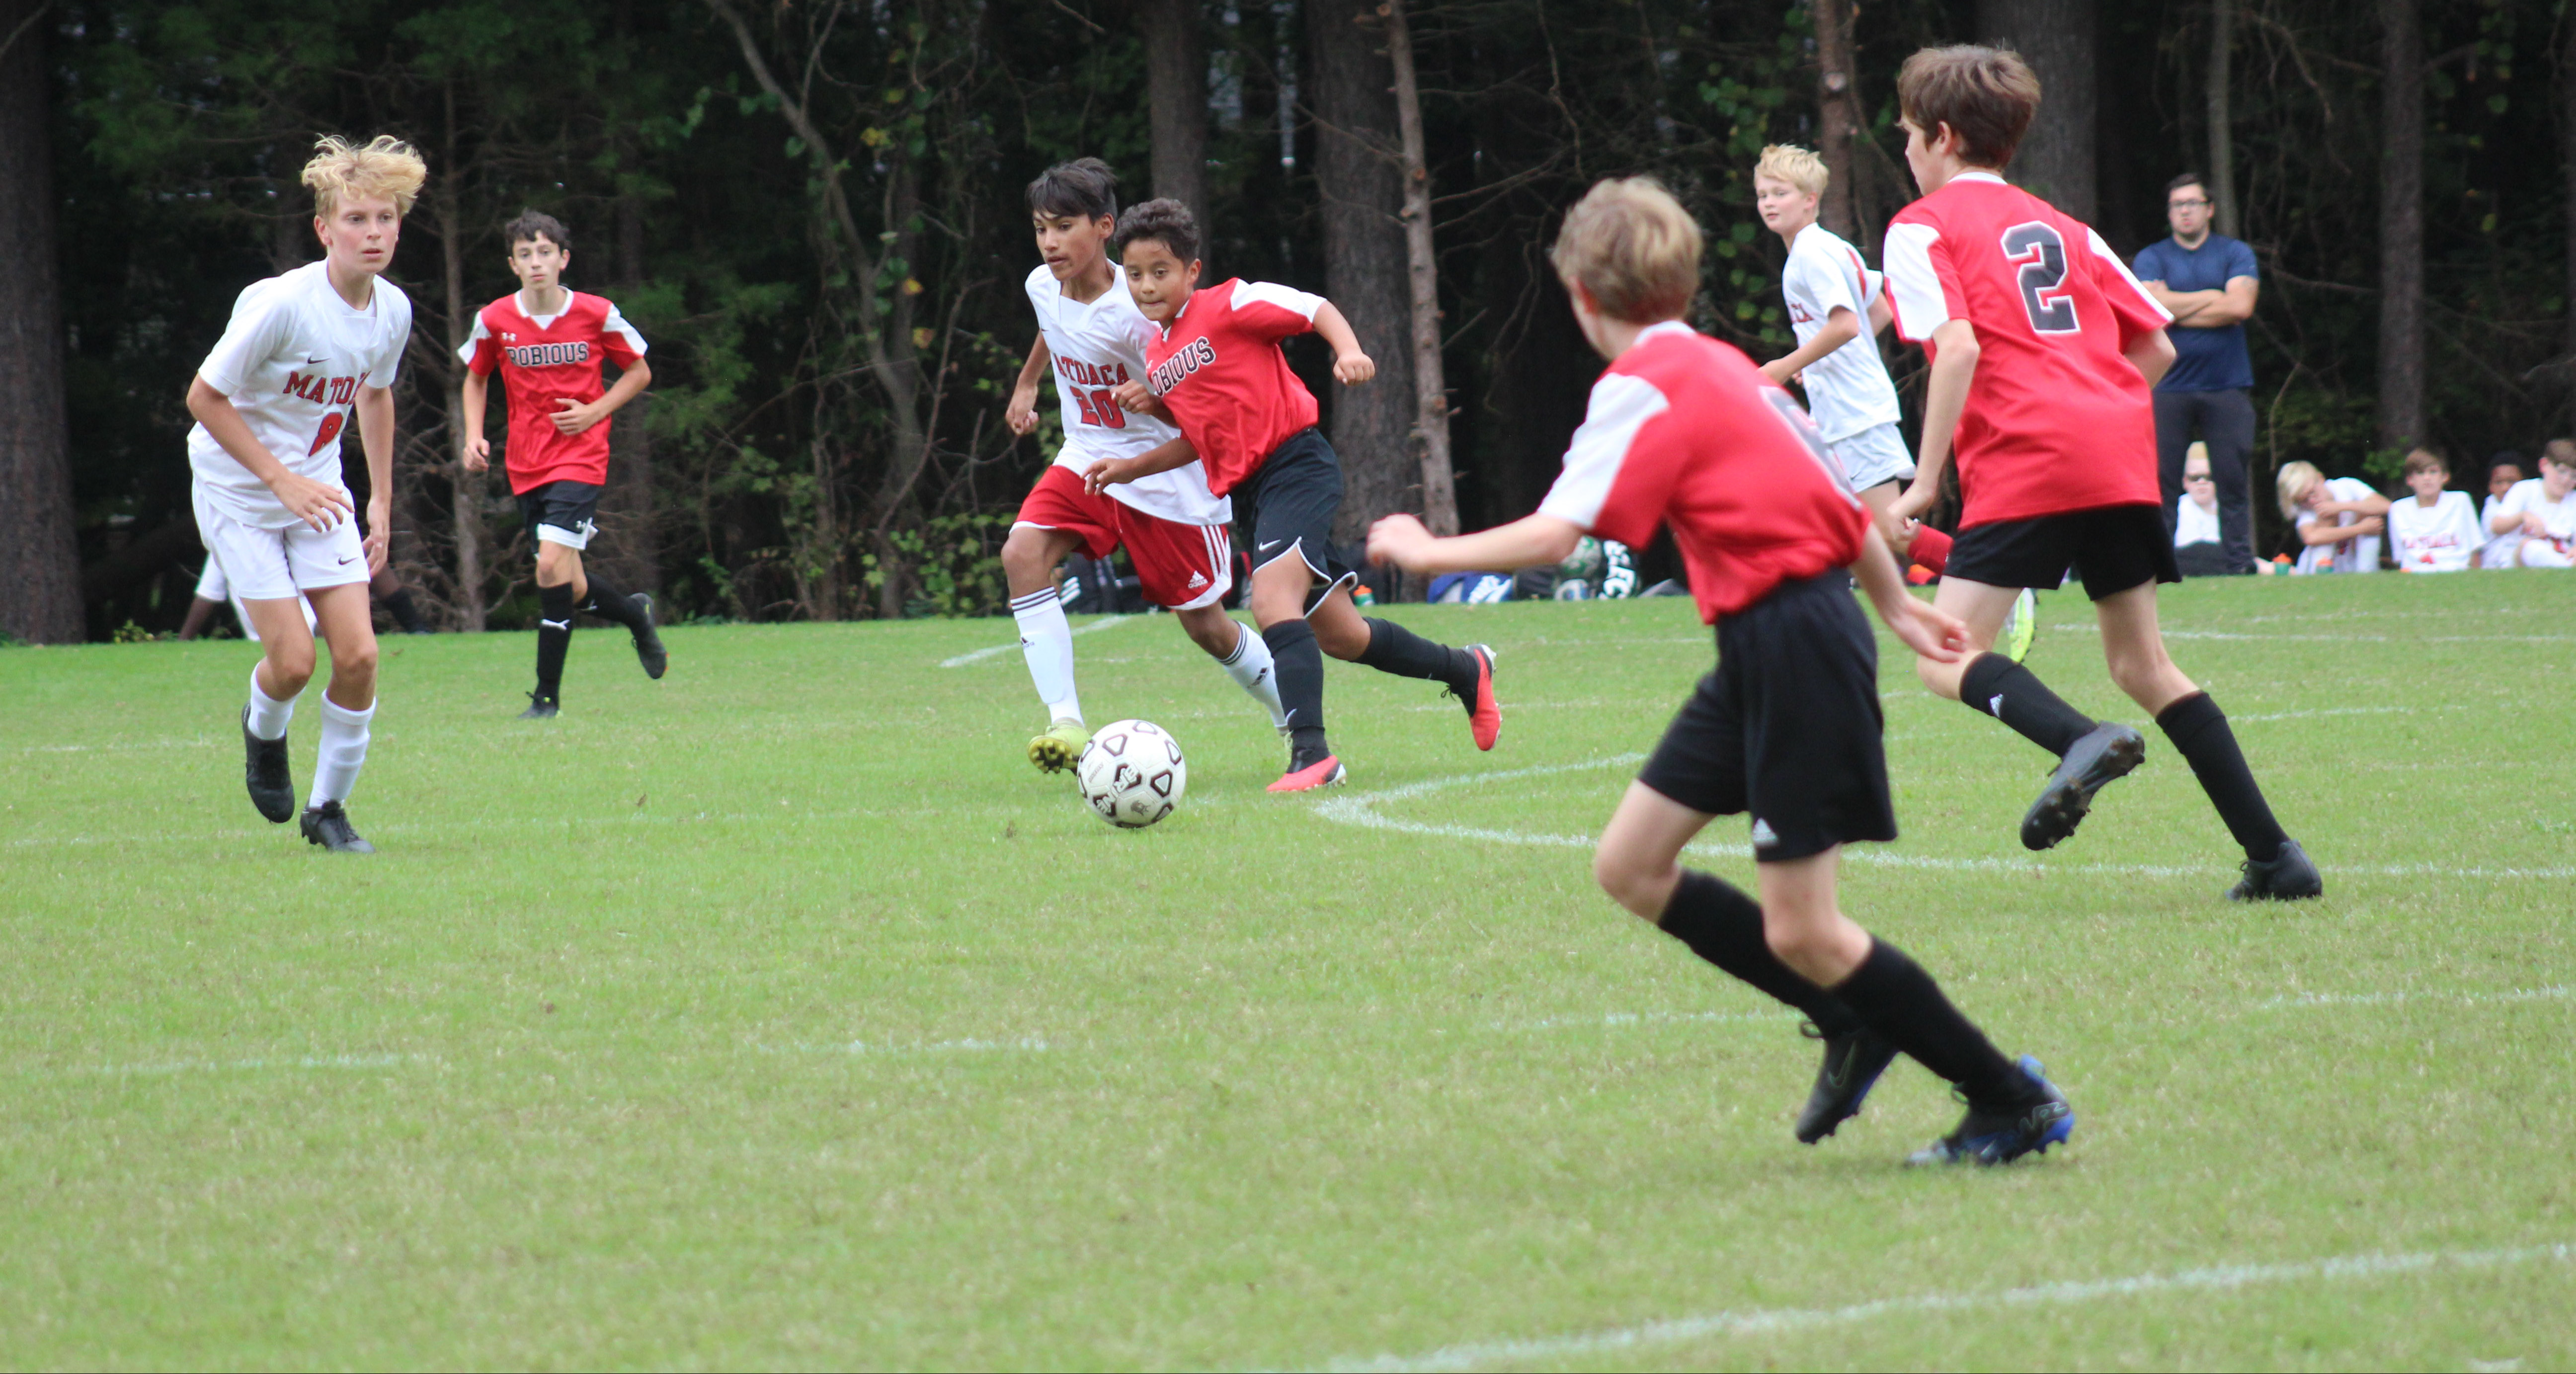 Boys soccer team in action on the field